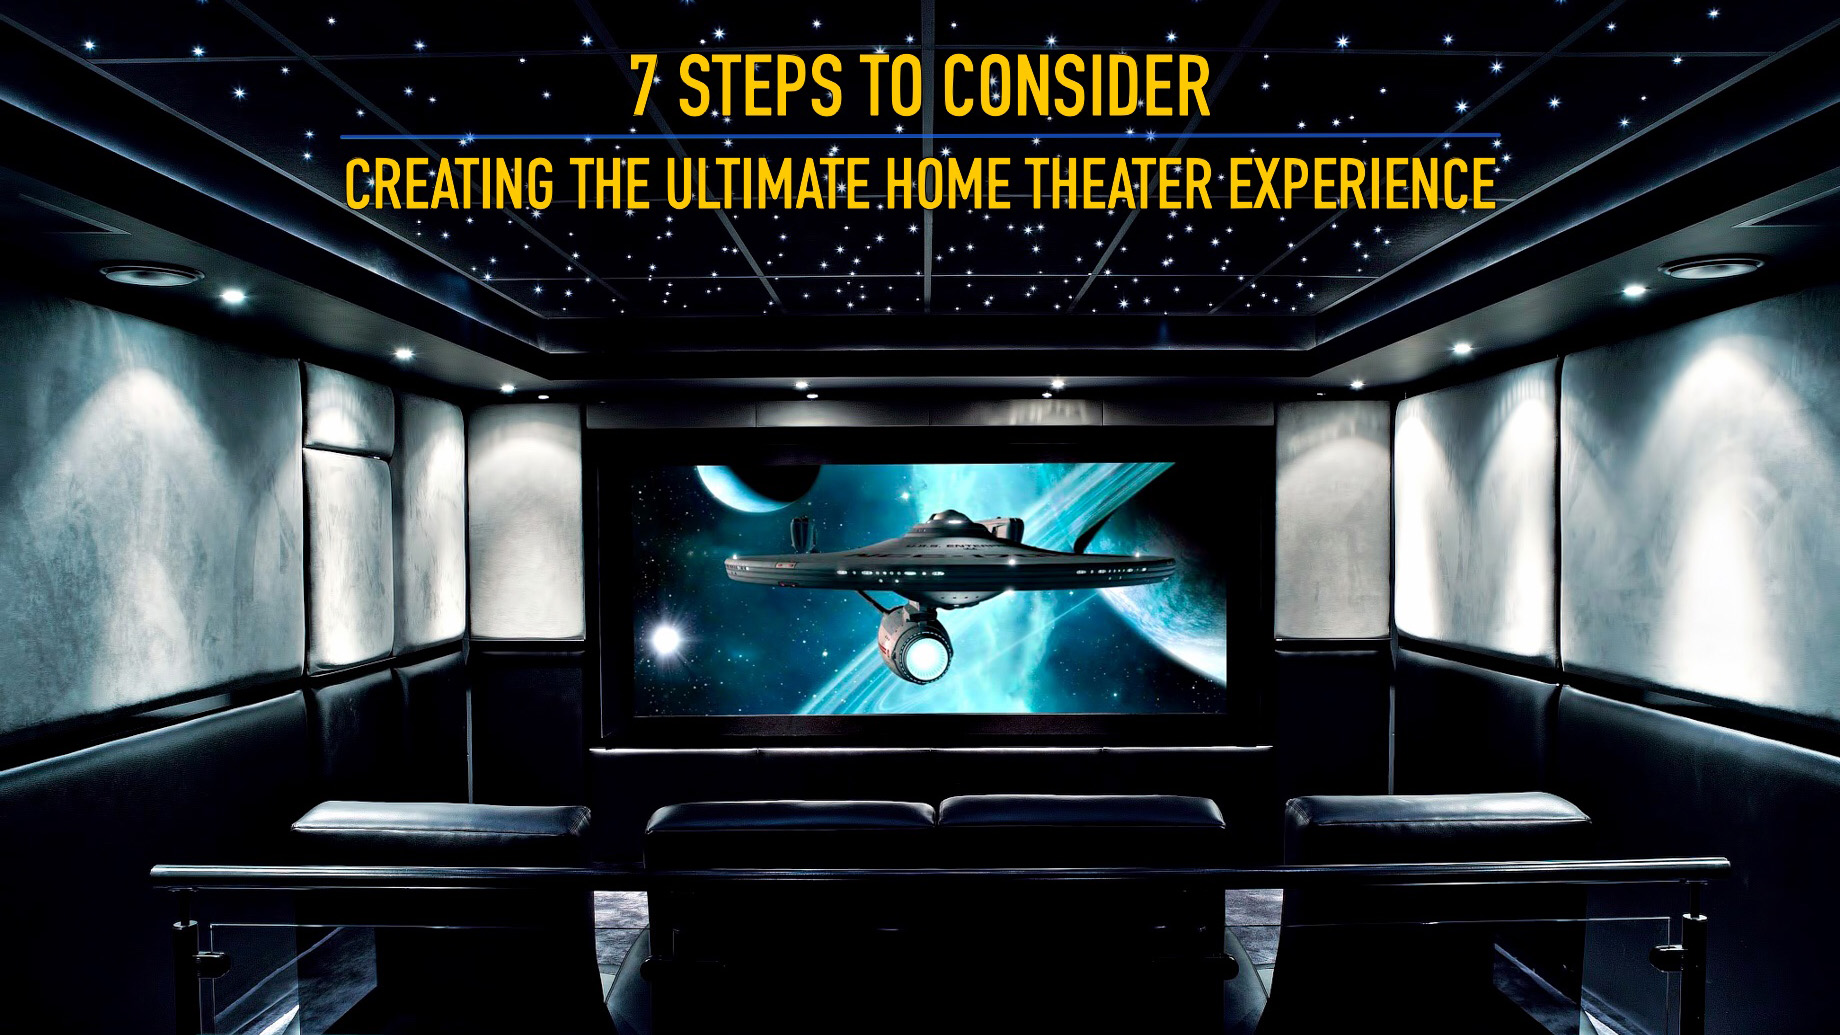 7 Steps to Consider for Creating the Ultimate Home Theater Experience